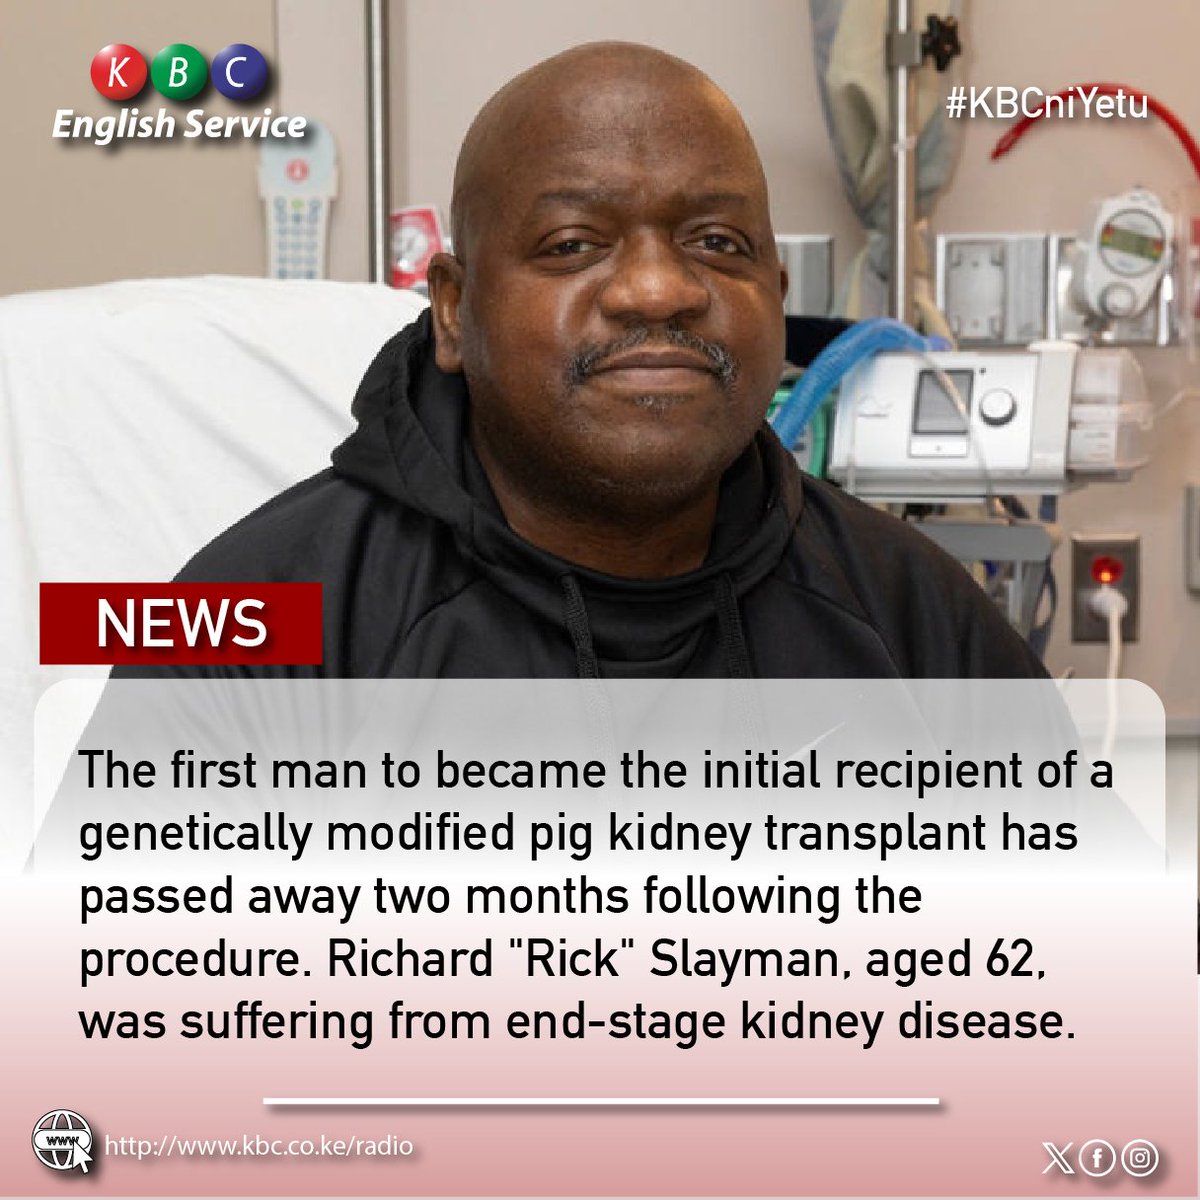 The first man to became the initial recipient of a genetically modified pig kidney transplant has passed away two months following the procedure. Richard 'Rick' Slayman, aged 62, was suffering from end-stage kidney disease. ^PMN #KBCEnglishService